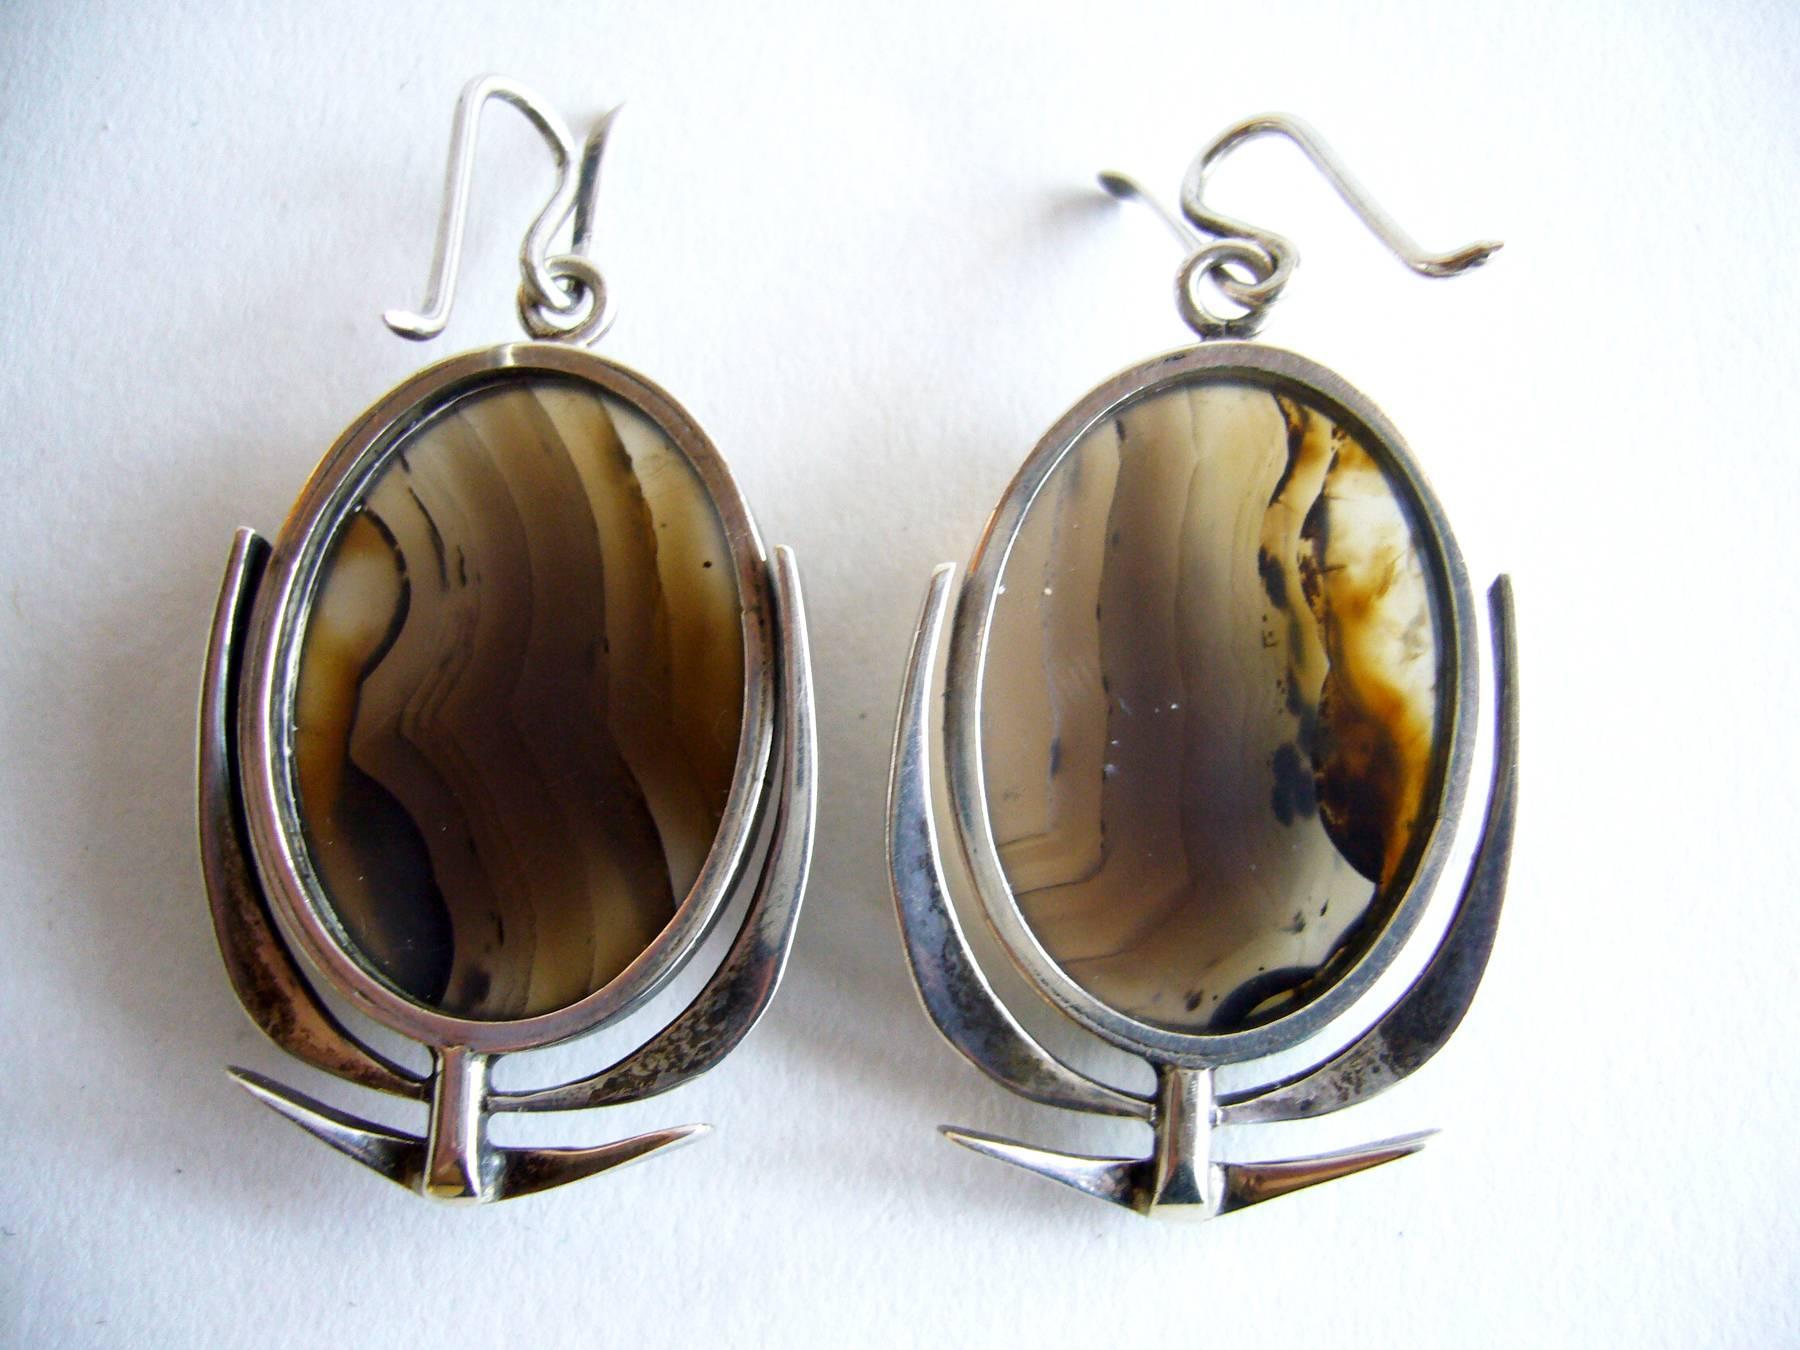 Highly crafted sterling silver and agate pierced earrings created by San Francisco modernist jeweler, Jack Nutting.  Earrings measure 1 3/4